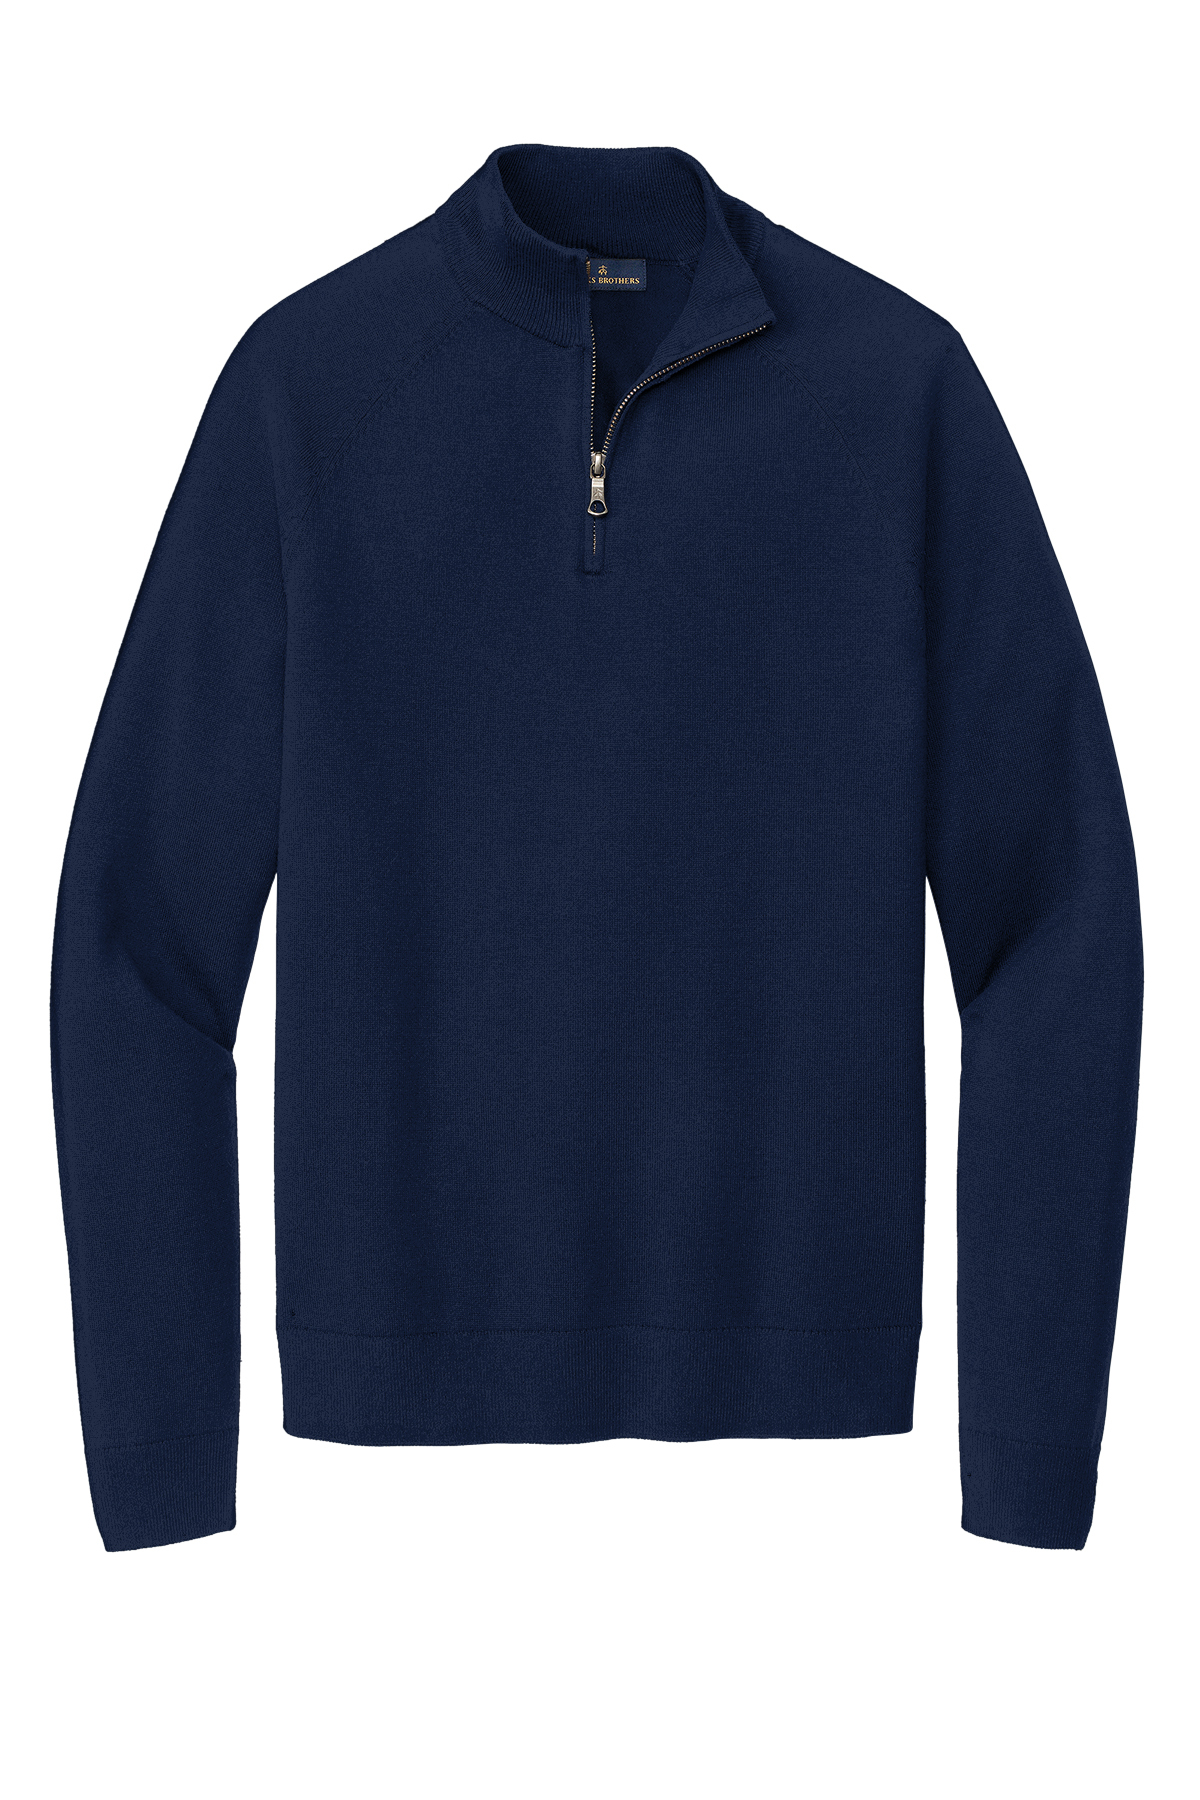 Brooks Brothers Cotton Stretch 1/4-Zip Sweater | Product | SanMar